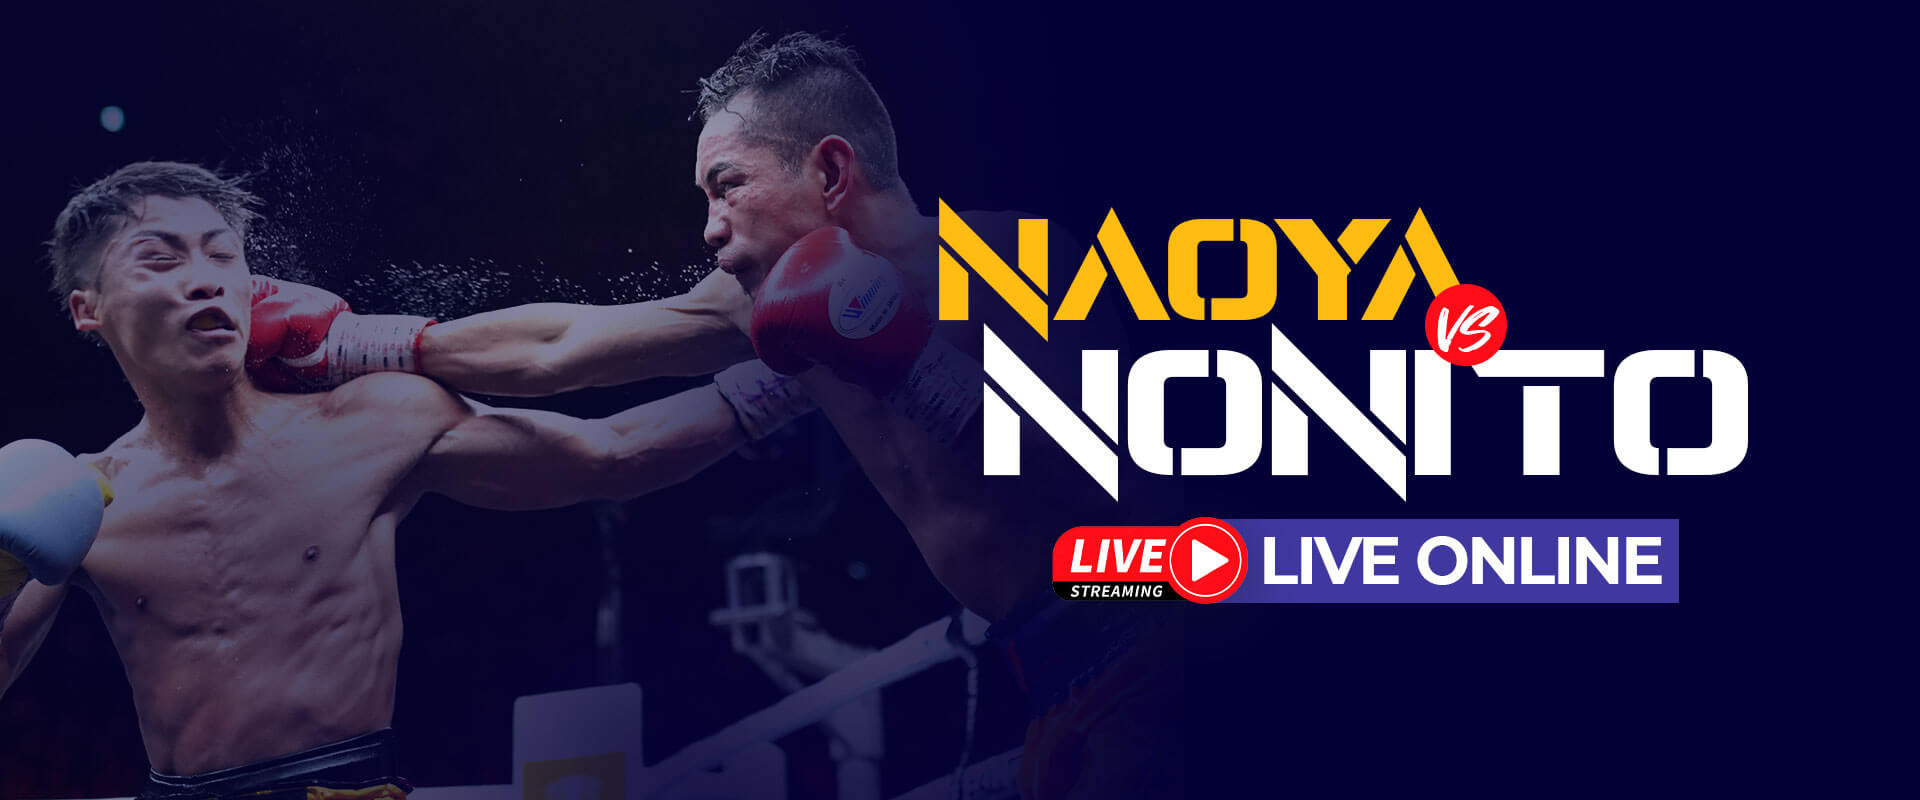 How to Watch Nonito Donaire vs Naoya Inoue Live Online